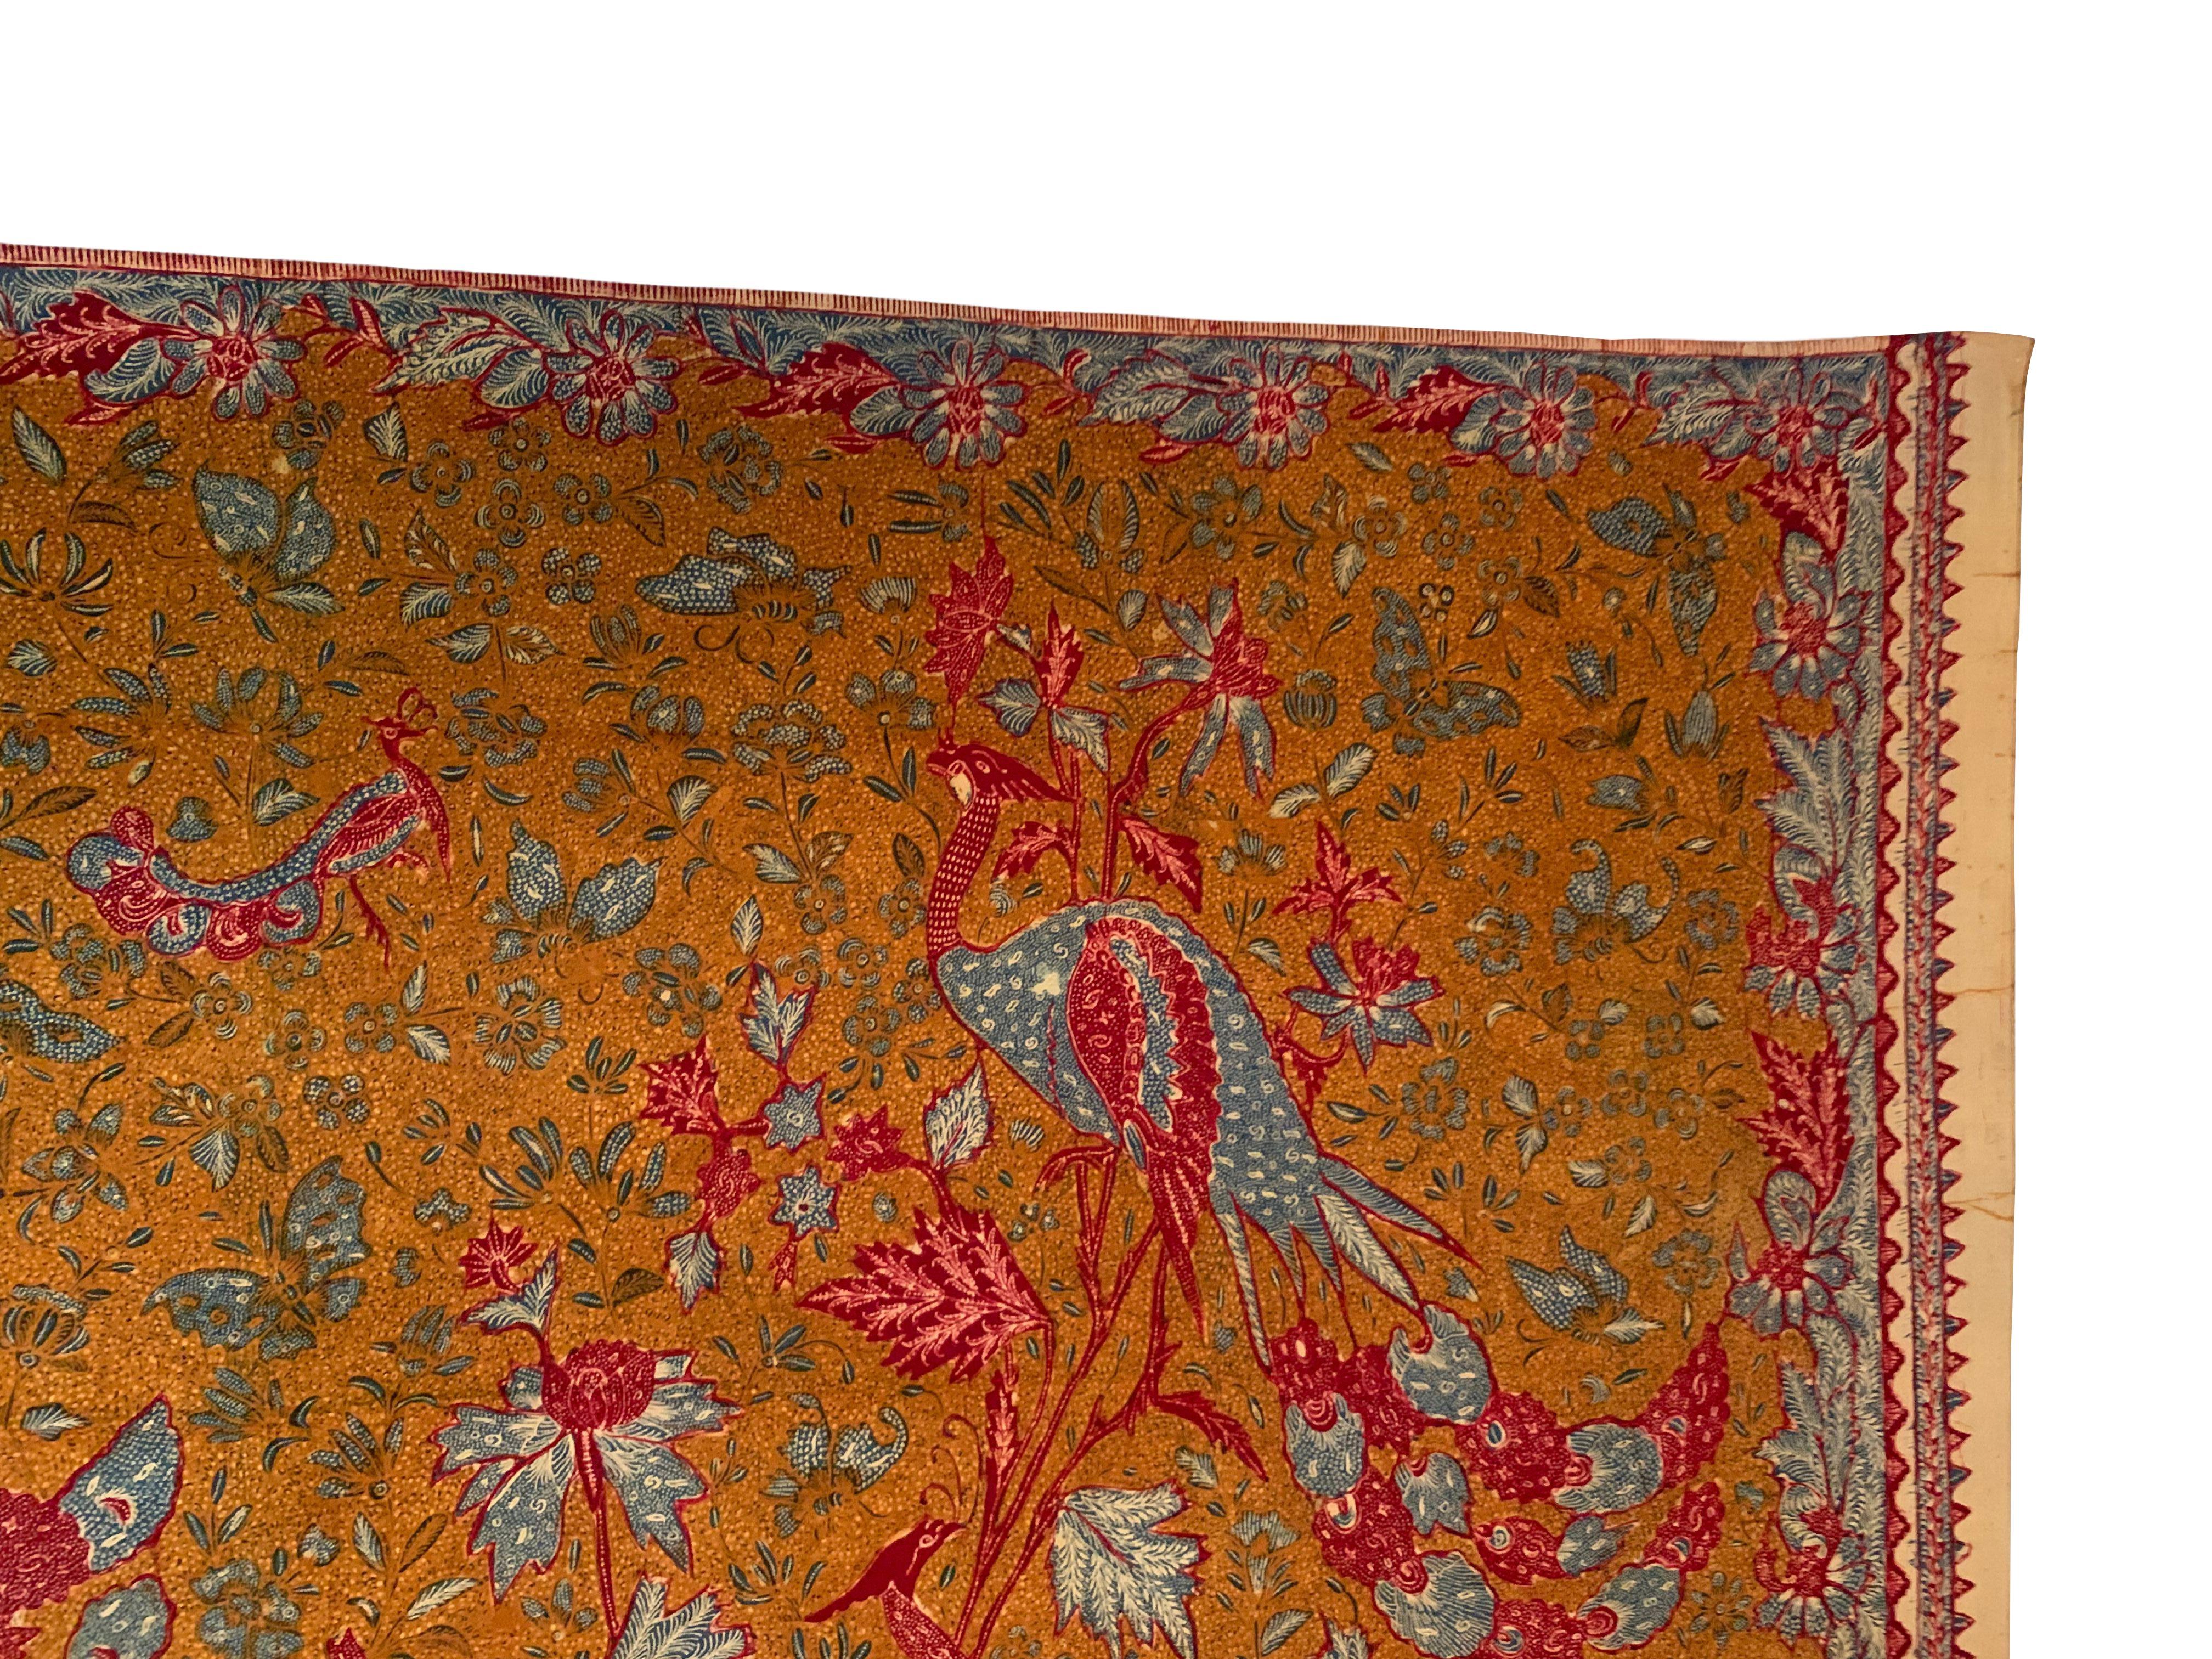 A fine example of a batik textile from Solo, Java, Indonesia. This textile features wonderful detailing & contrast. It features a wonderful array of floral and bird motifs throughout. 

